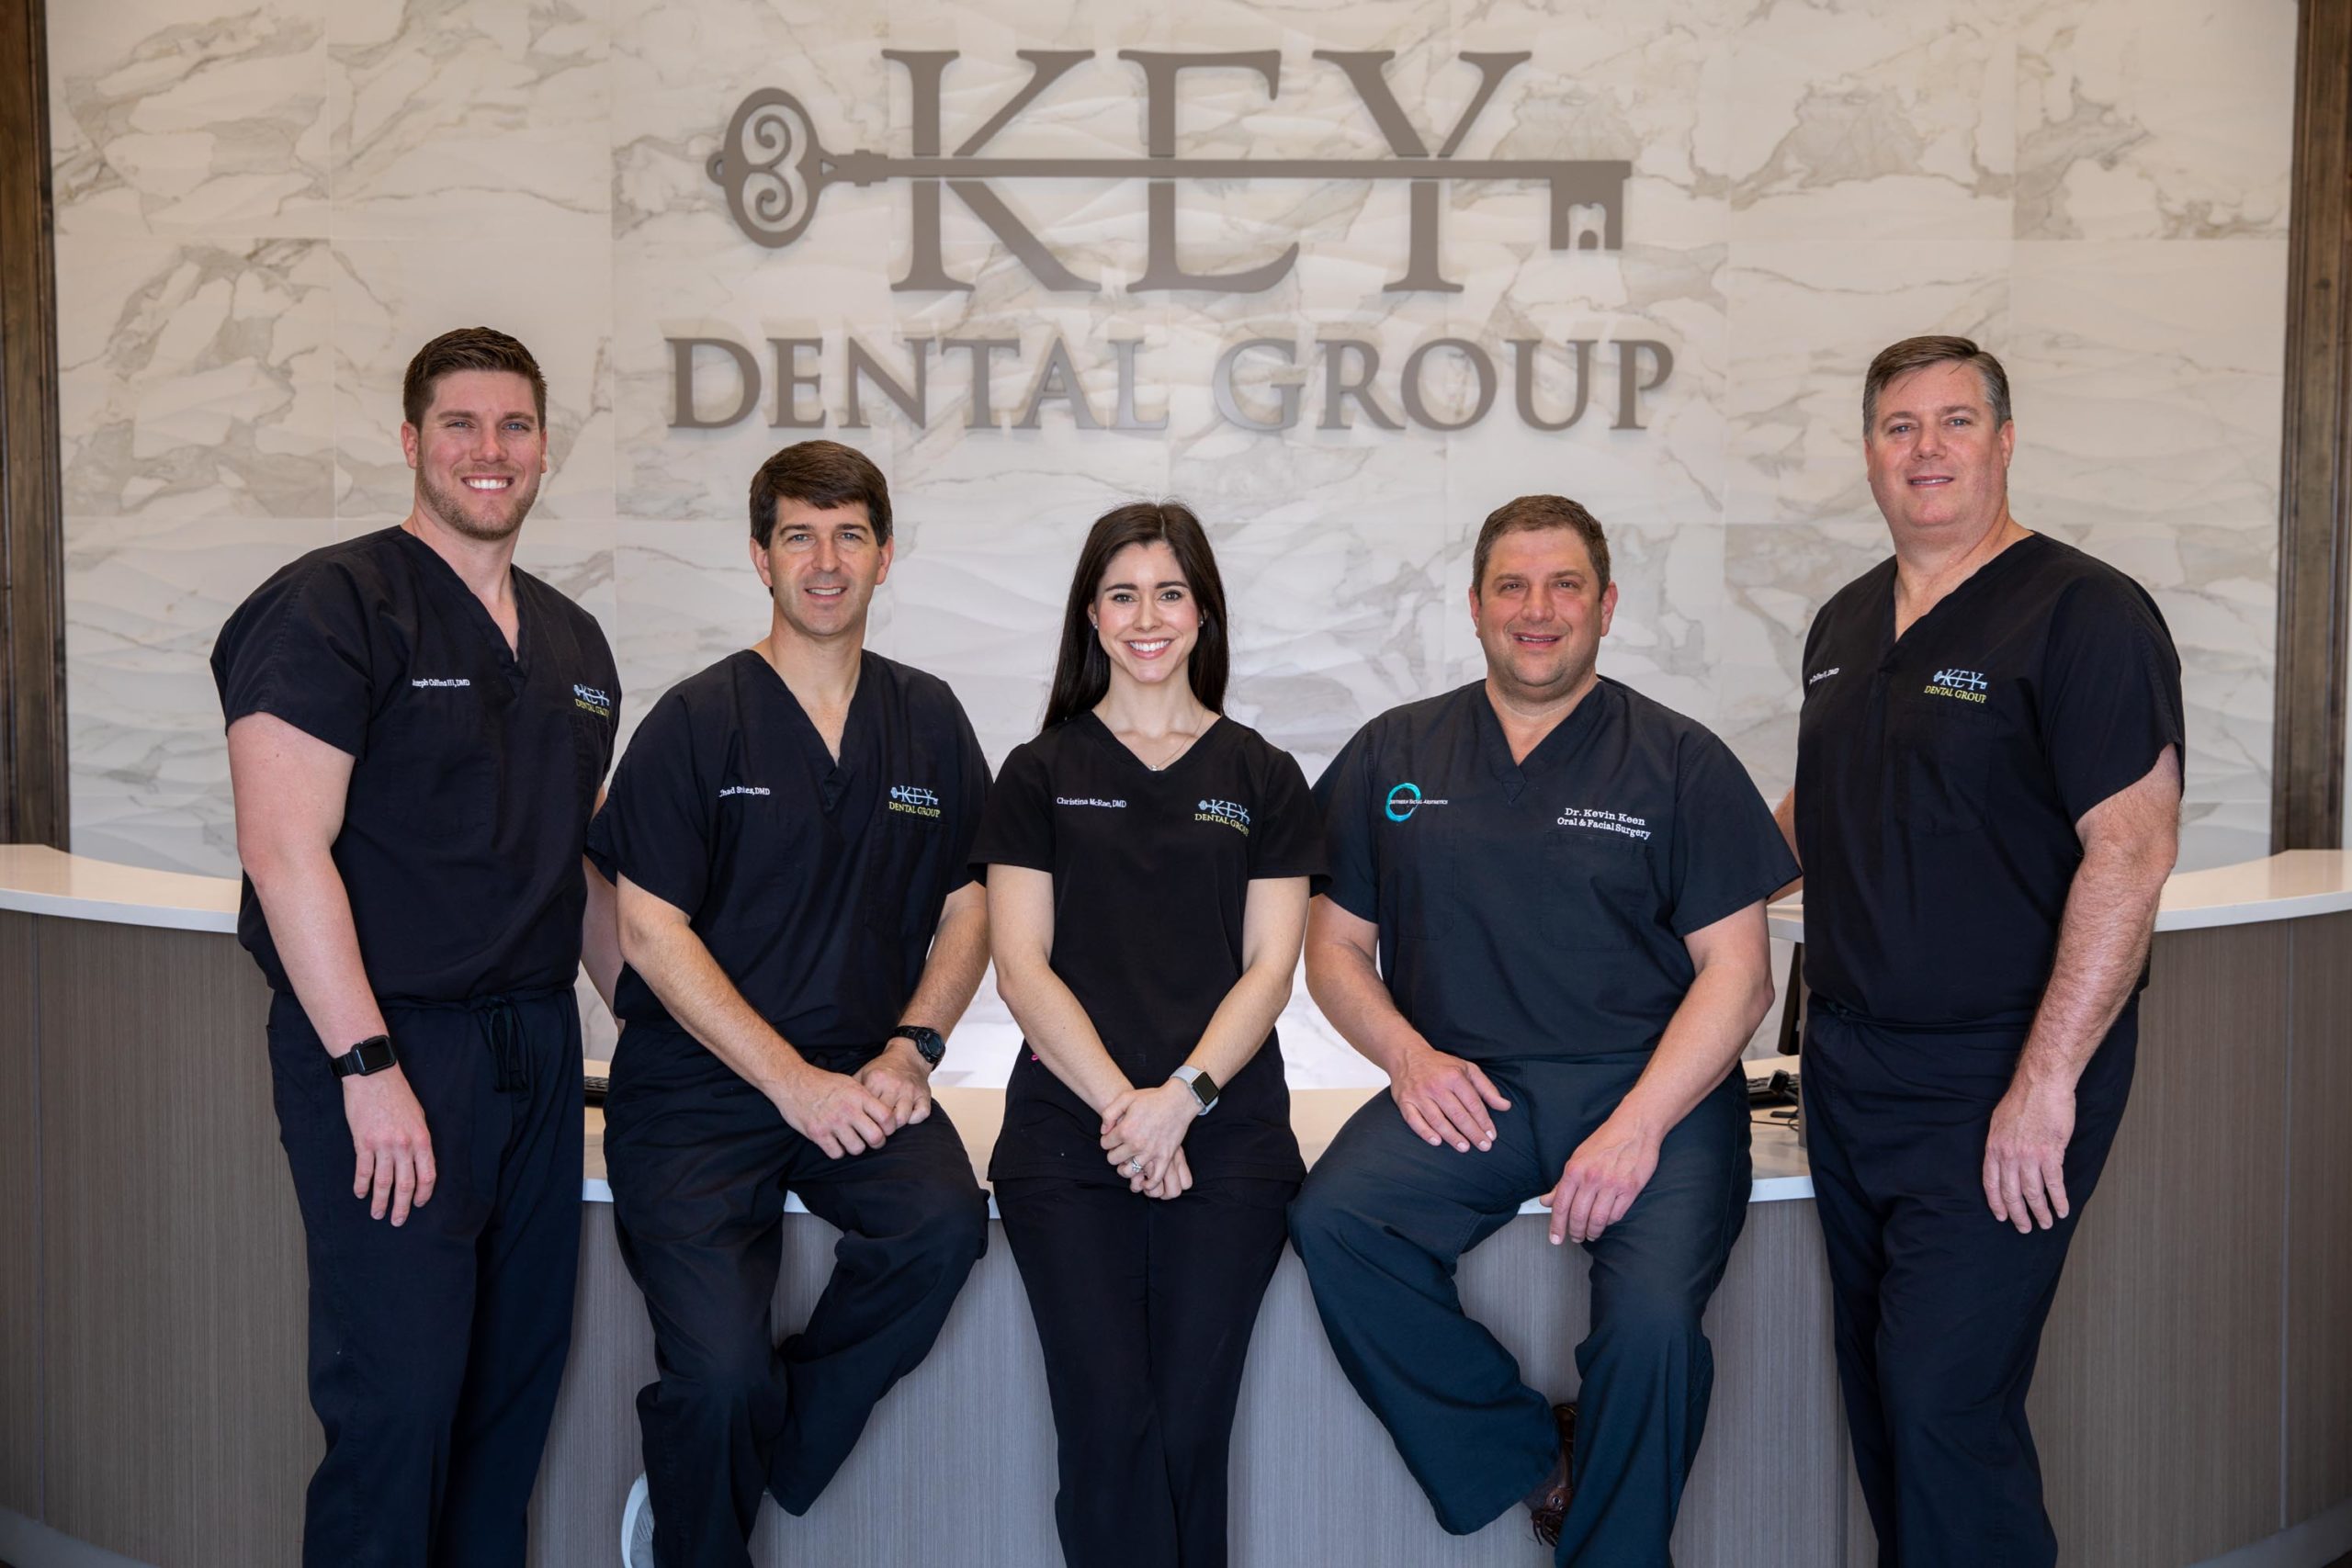 an image of the team at Key Dental Group in Pearl, Mississippi.